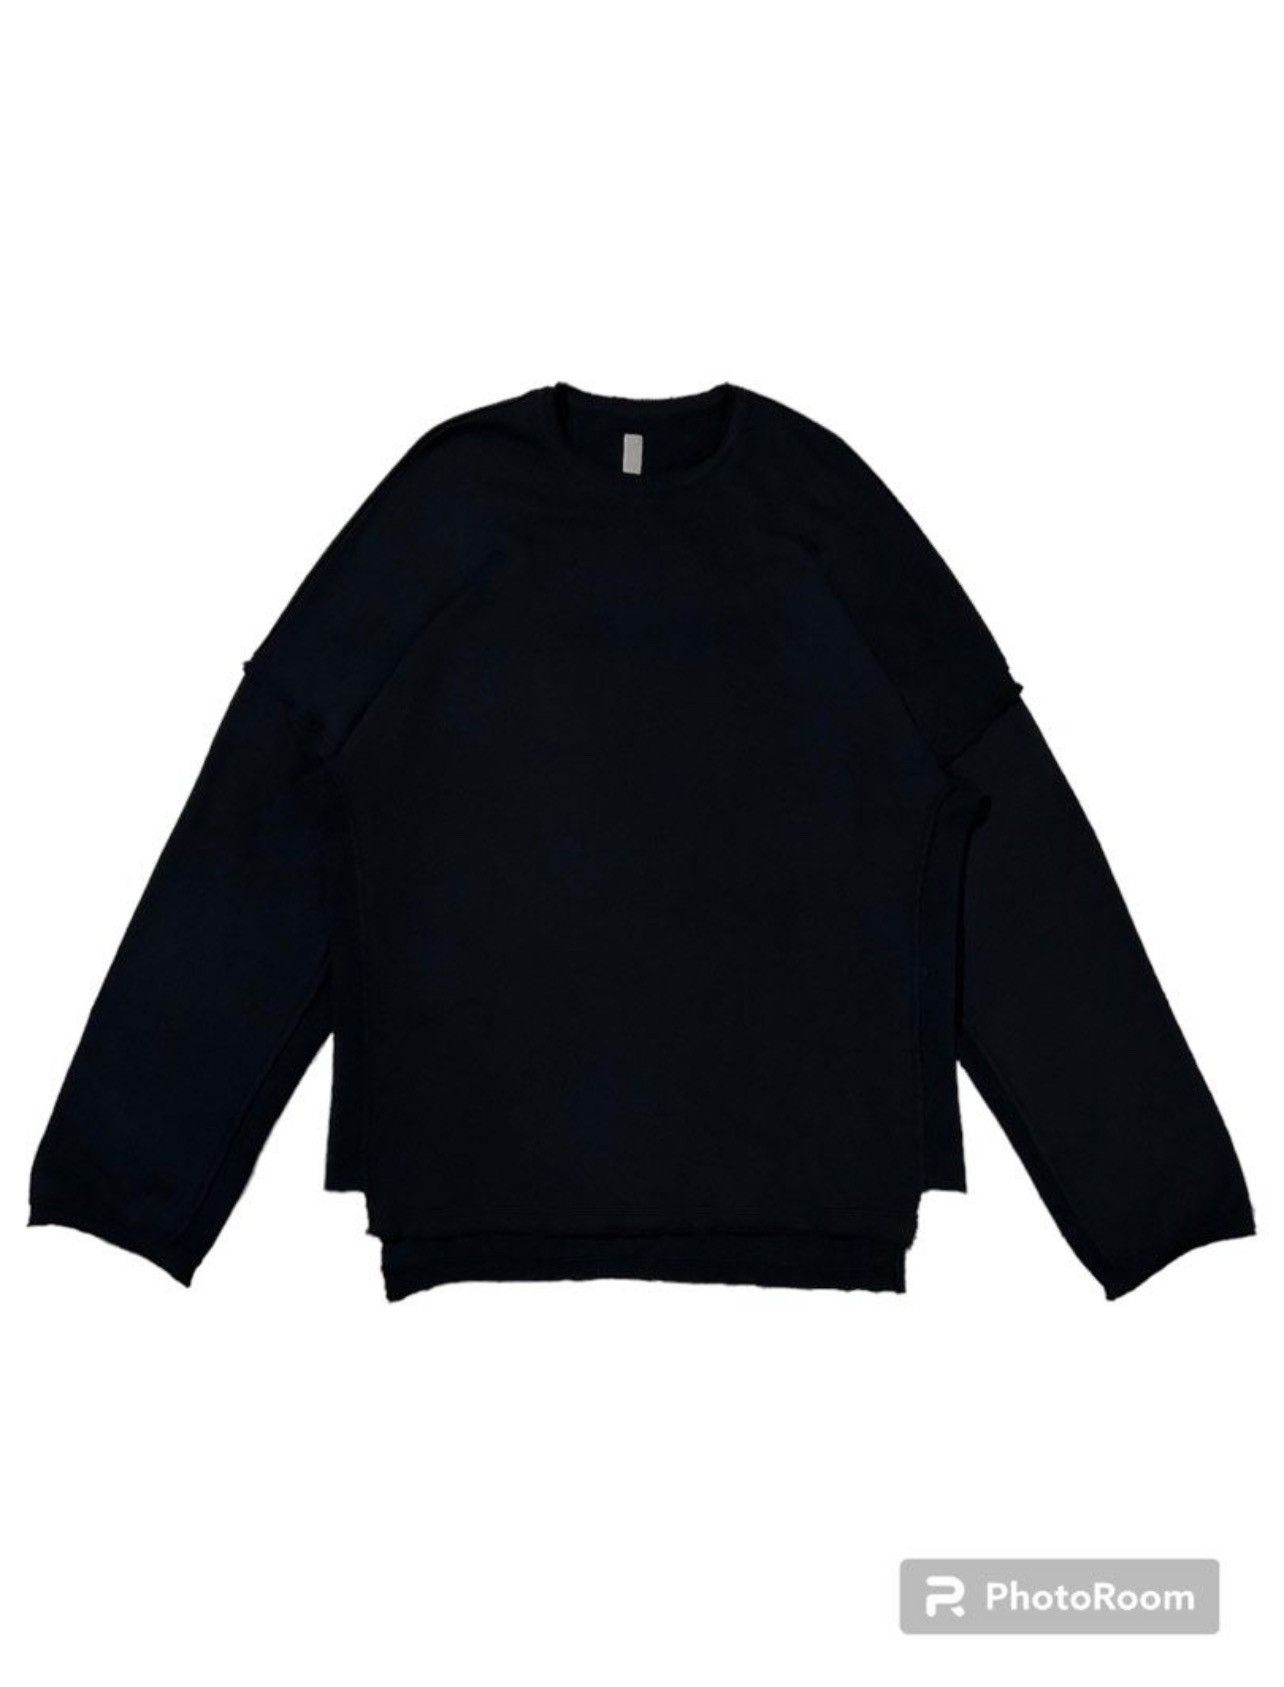 Silent By Damir Doma | Grailed